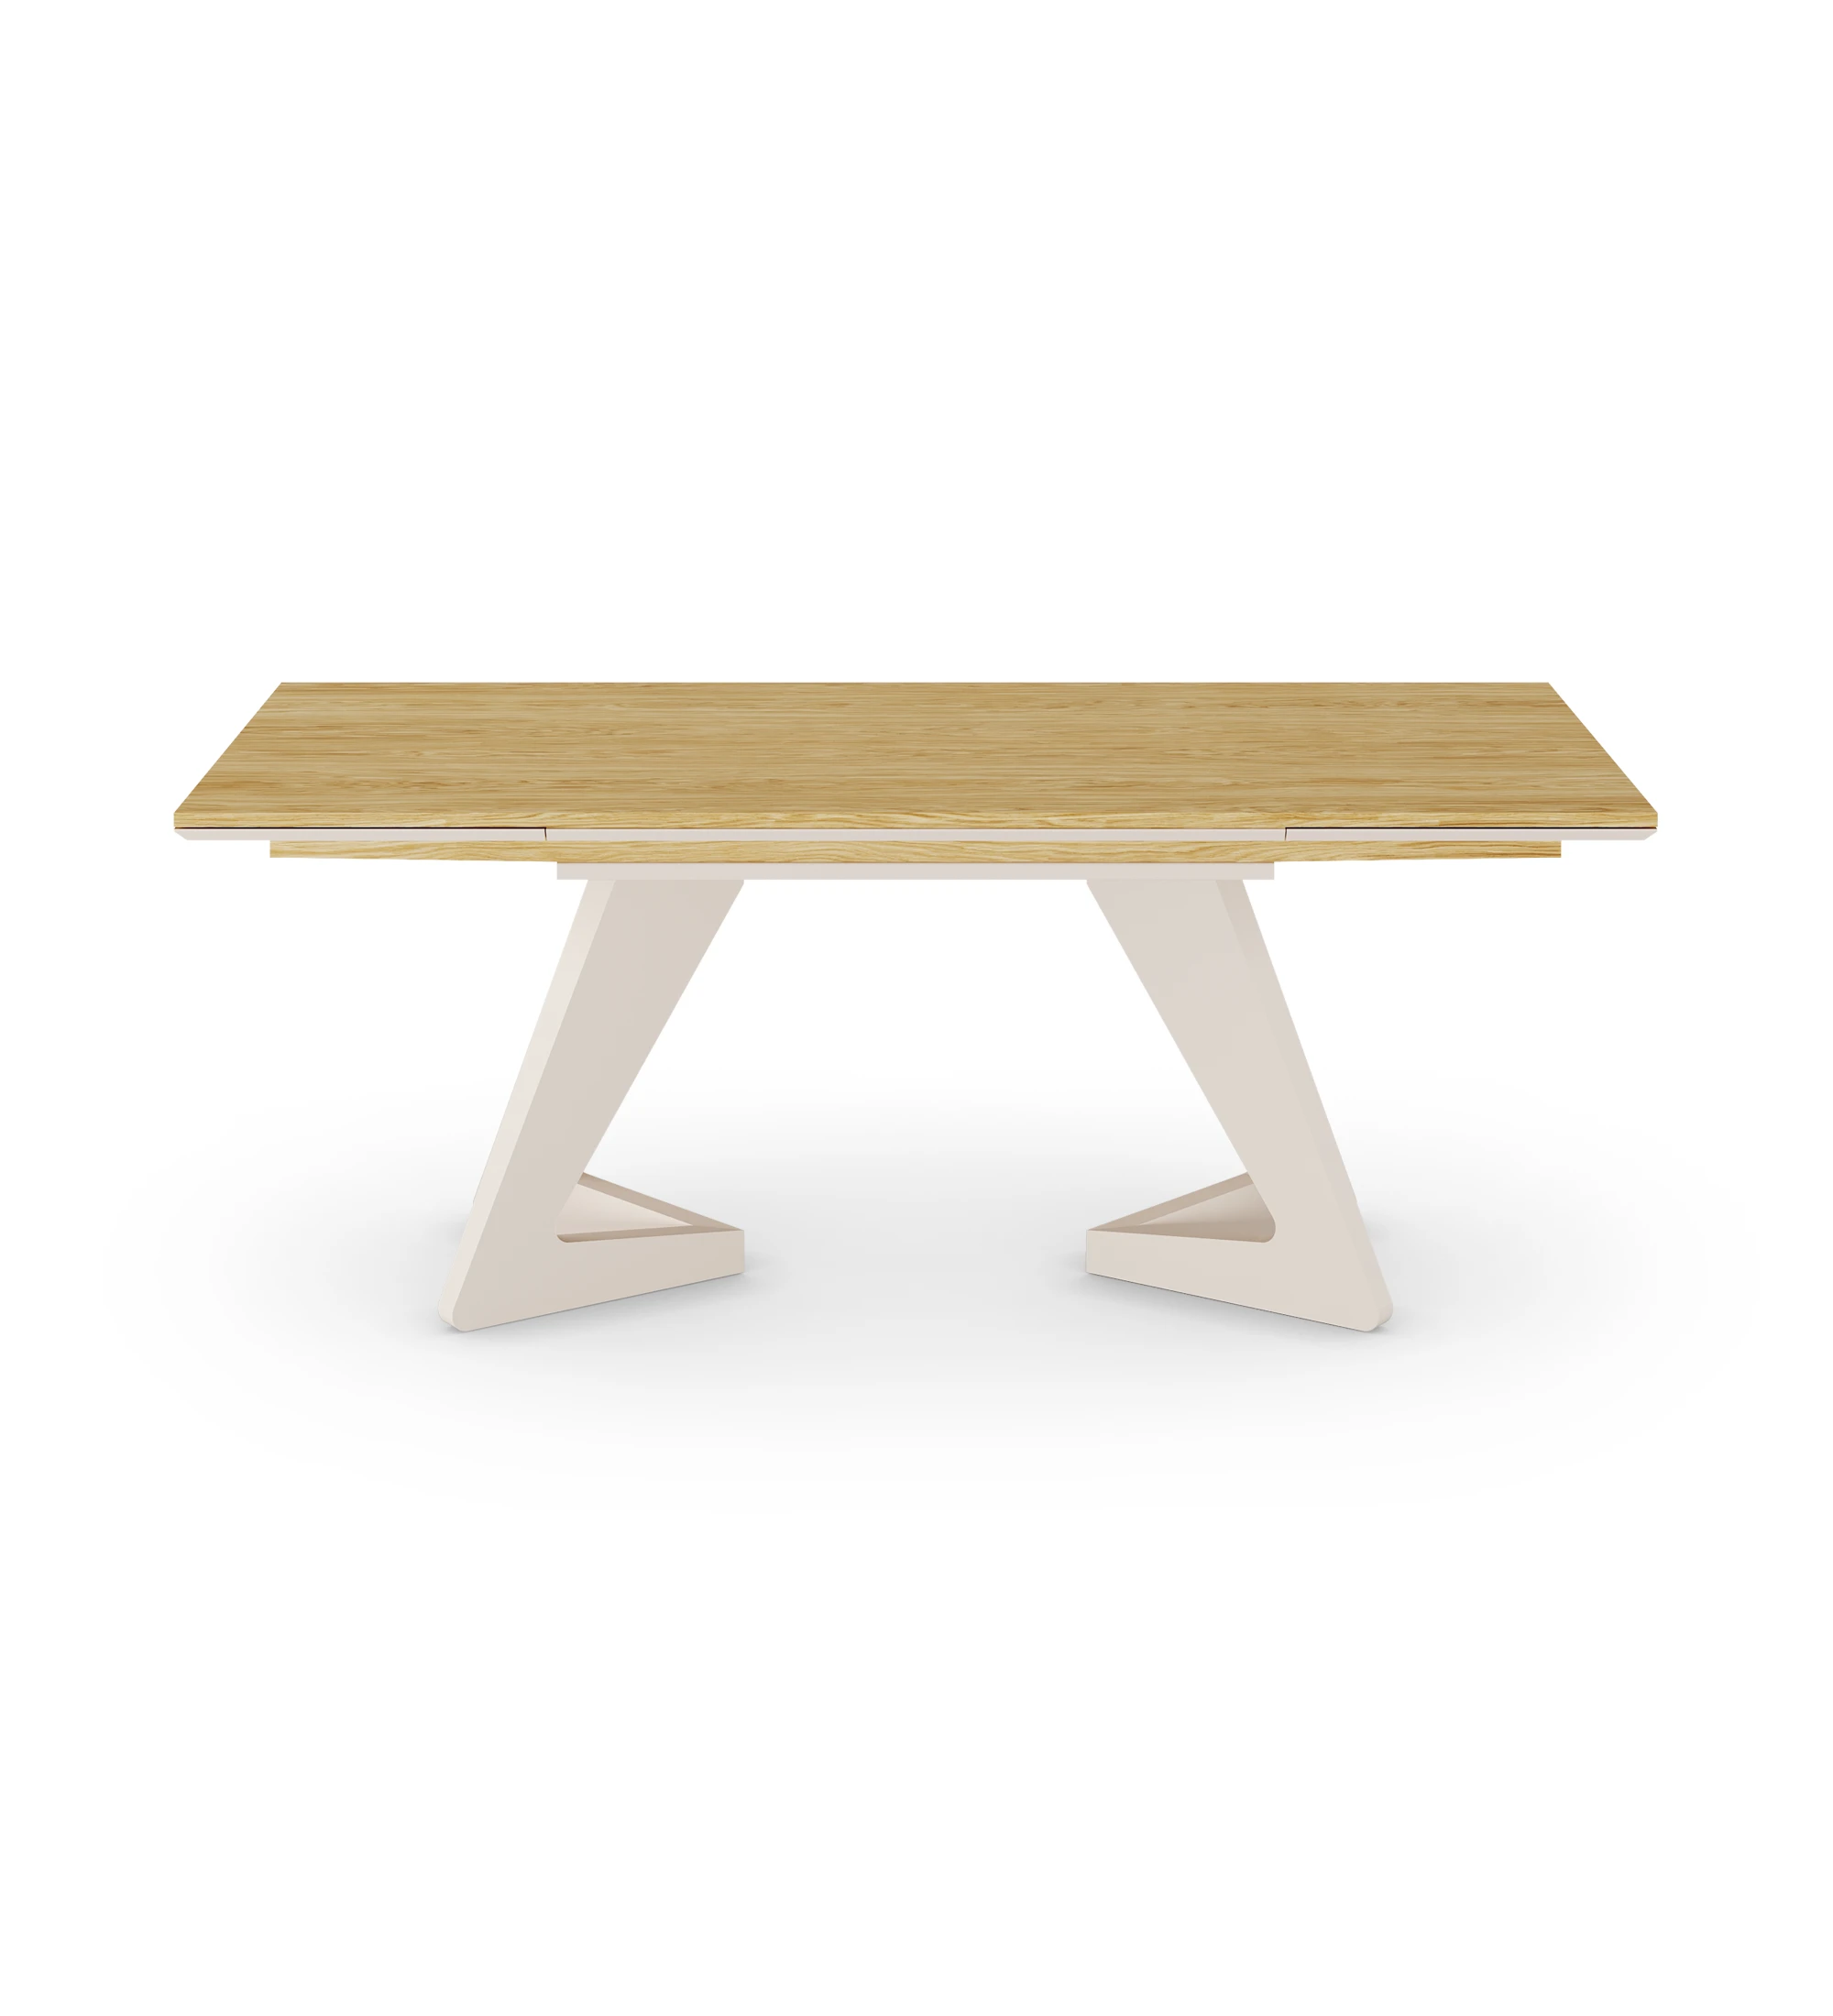 Évora extendable dining table in natural oak and pearl lacquered metal base.